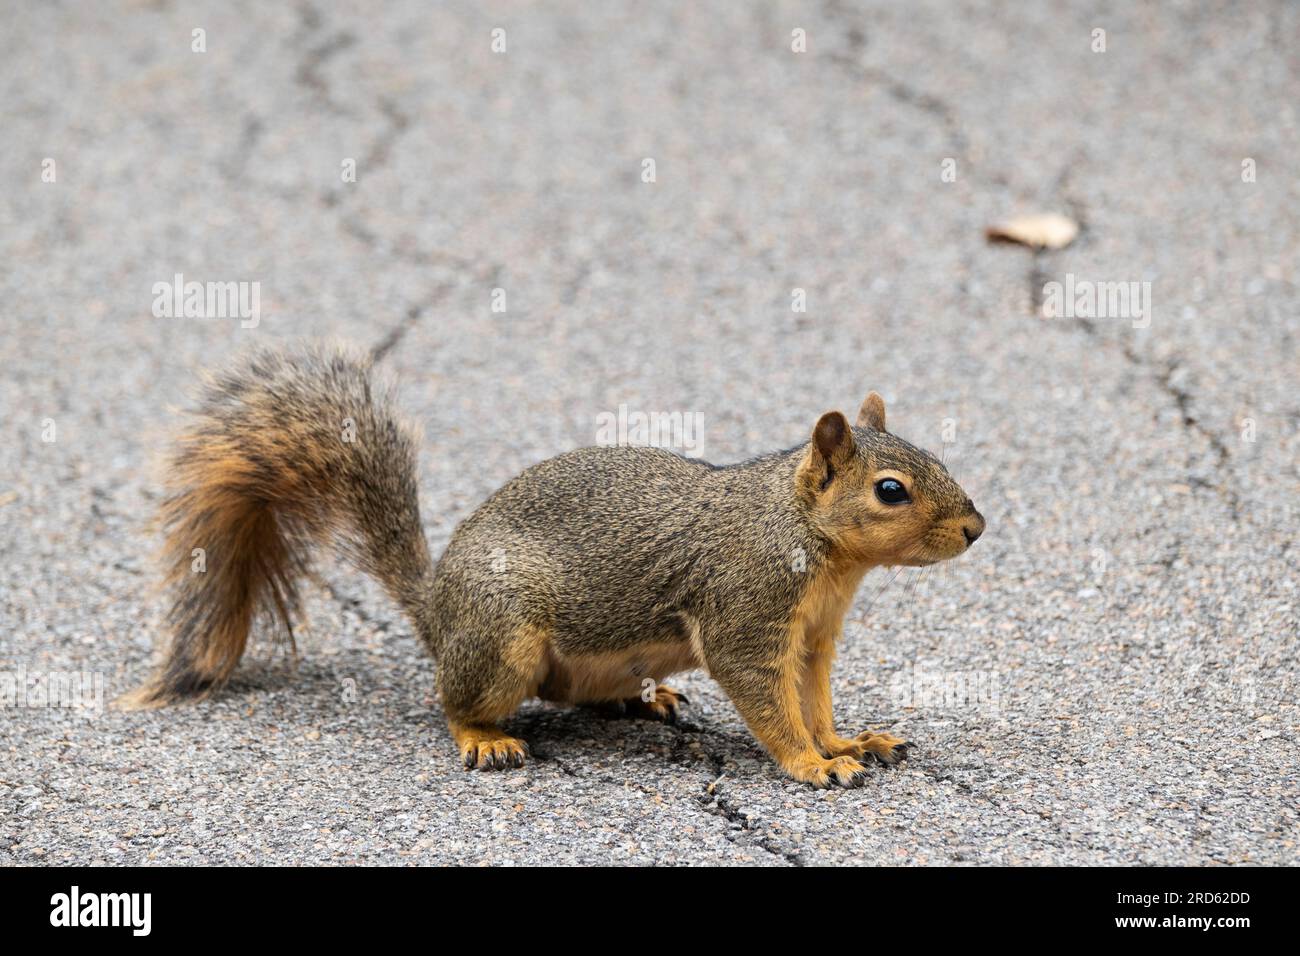 A female Fox squirrel, Sciurus niger, on all fours, showing recent nursing of young, is alert on a walking path in Wichita, Kansas, USA. Stock Photo